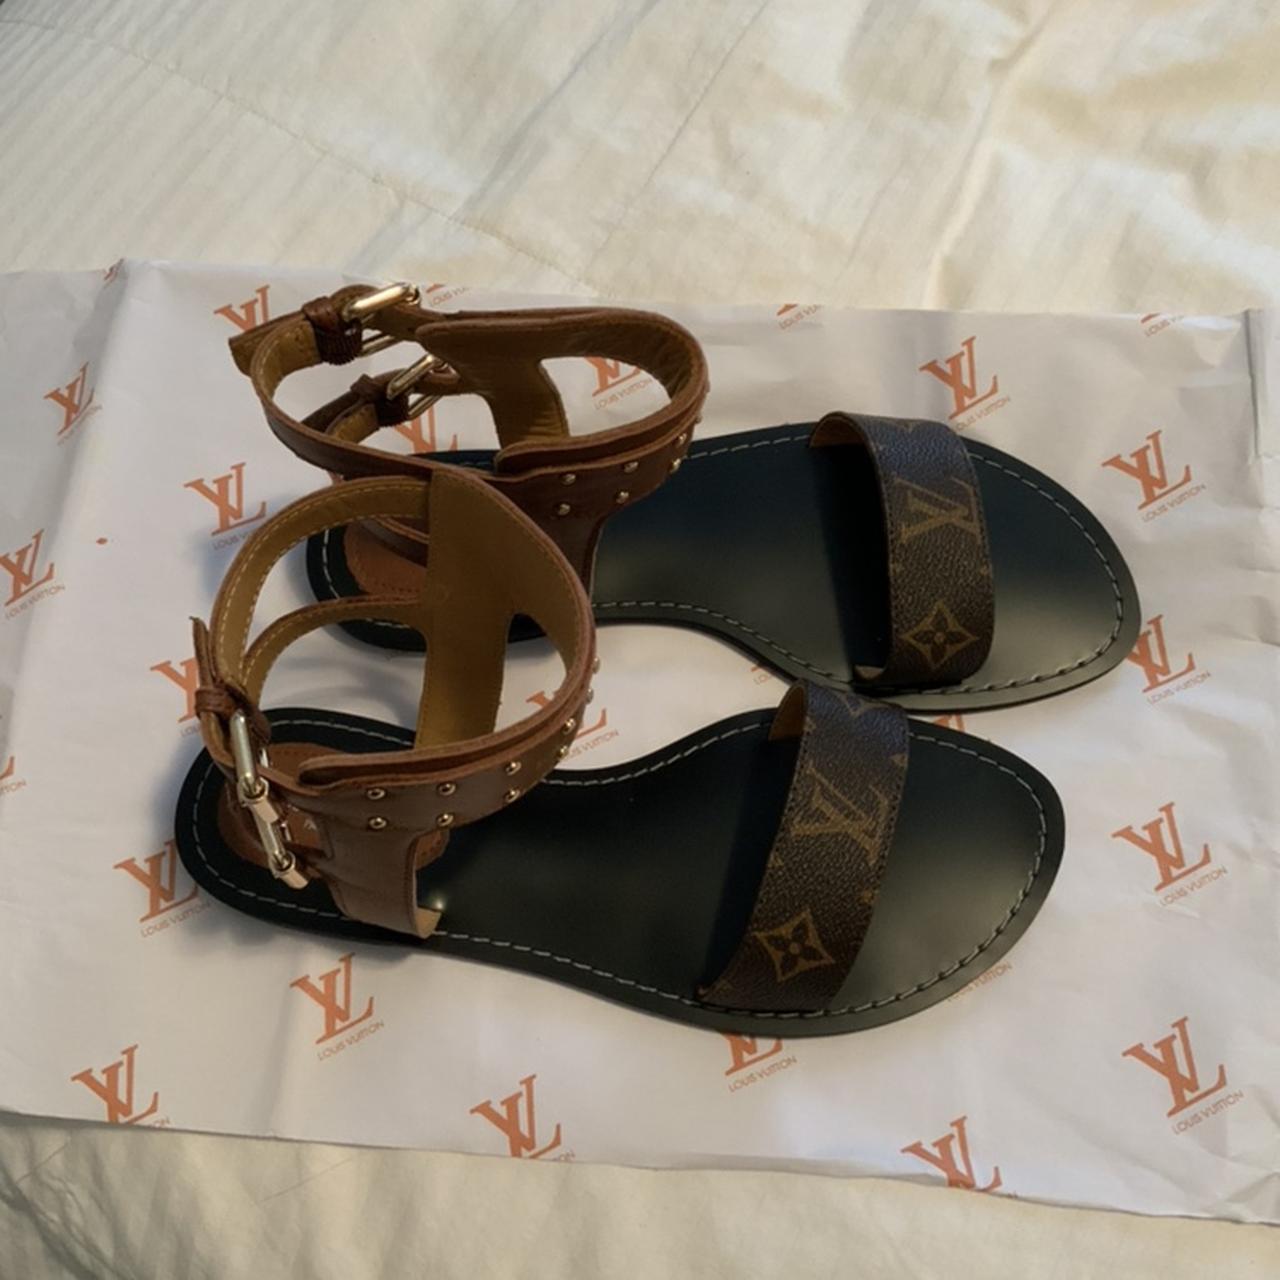 Lv sandal so cute got as a gift but not my size nor - Depop